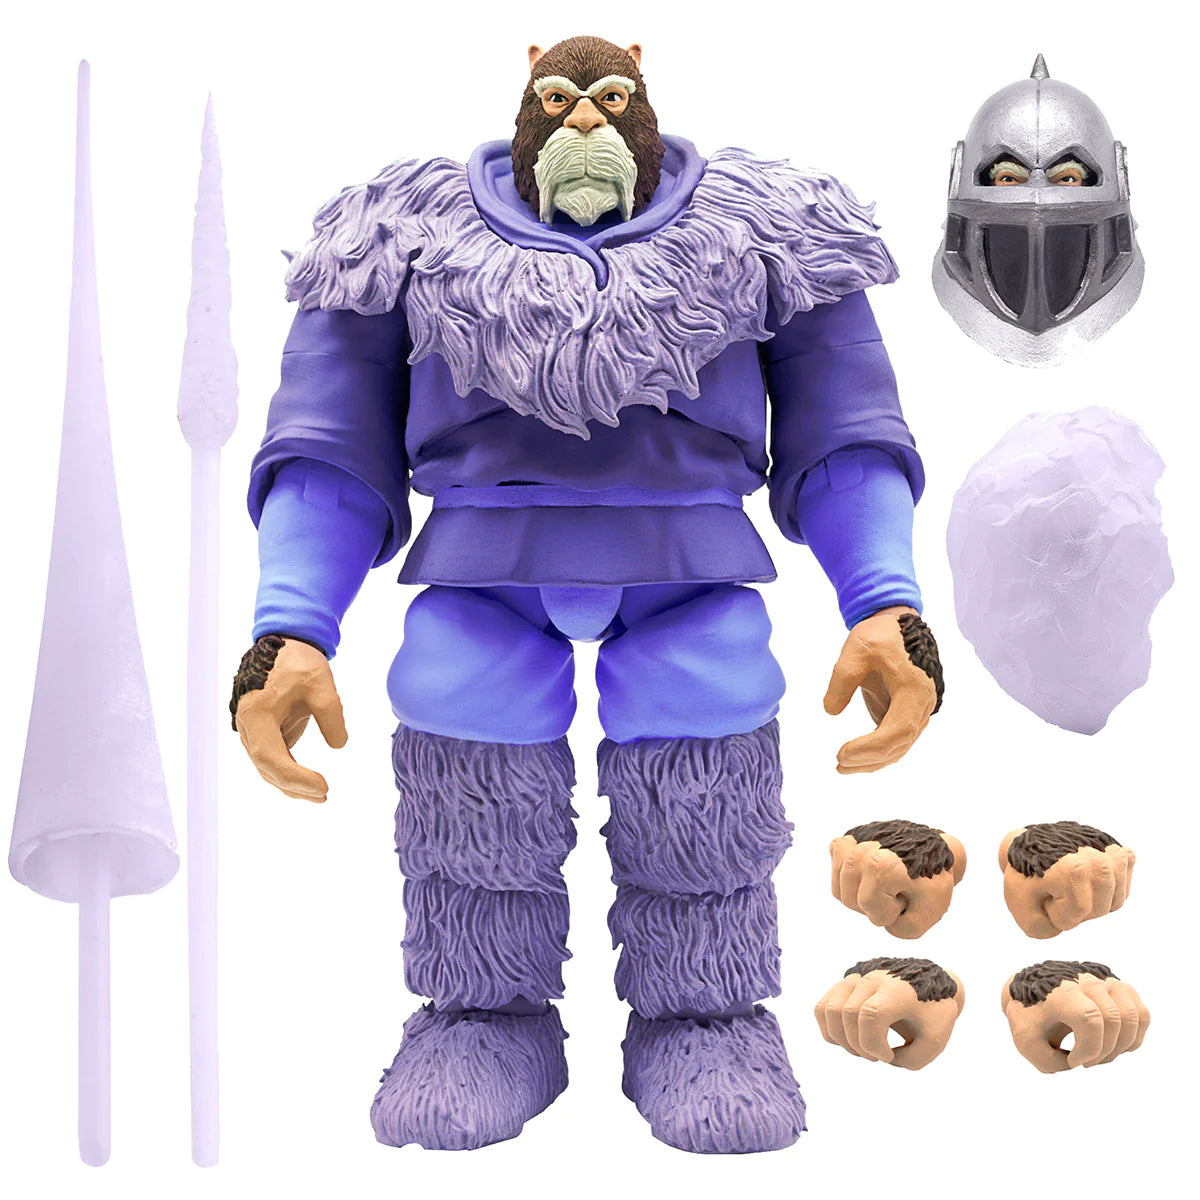 Snowman Of Hook Mountain ThunderCats ULTIMATES! Wave 4 By Super 7